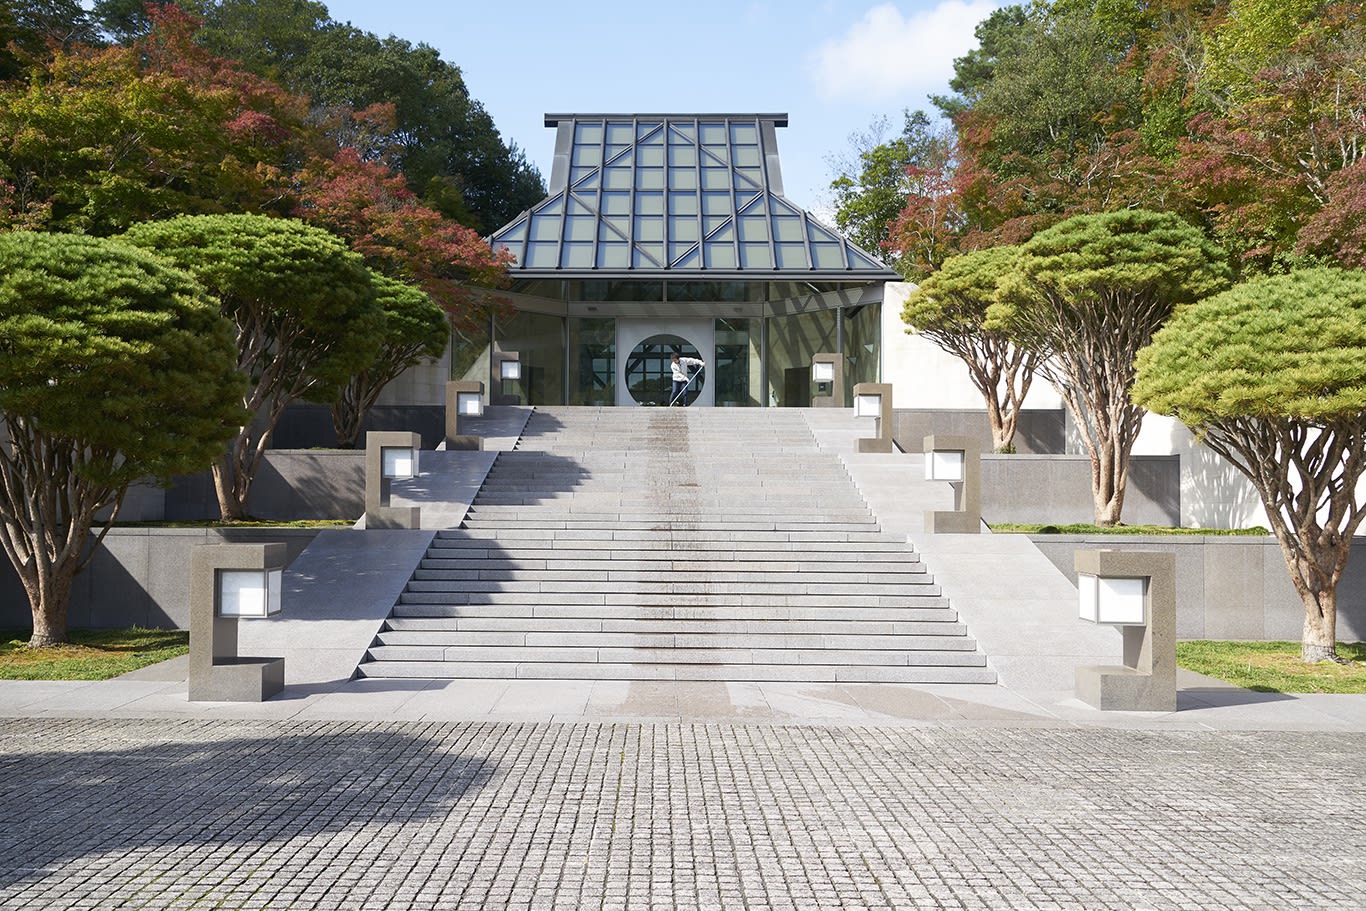 miho museum section